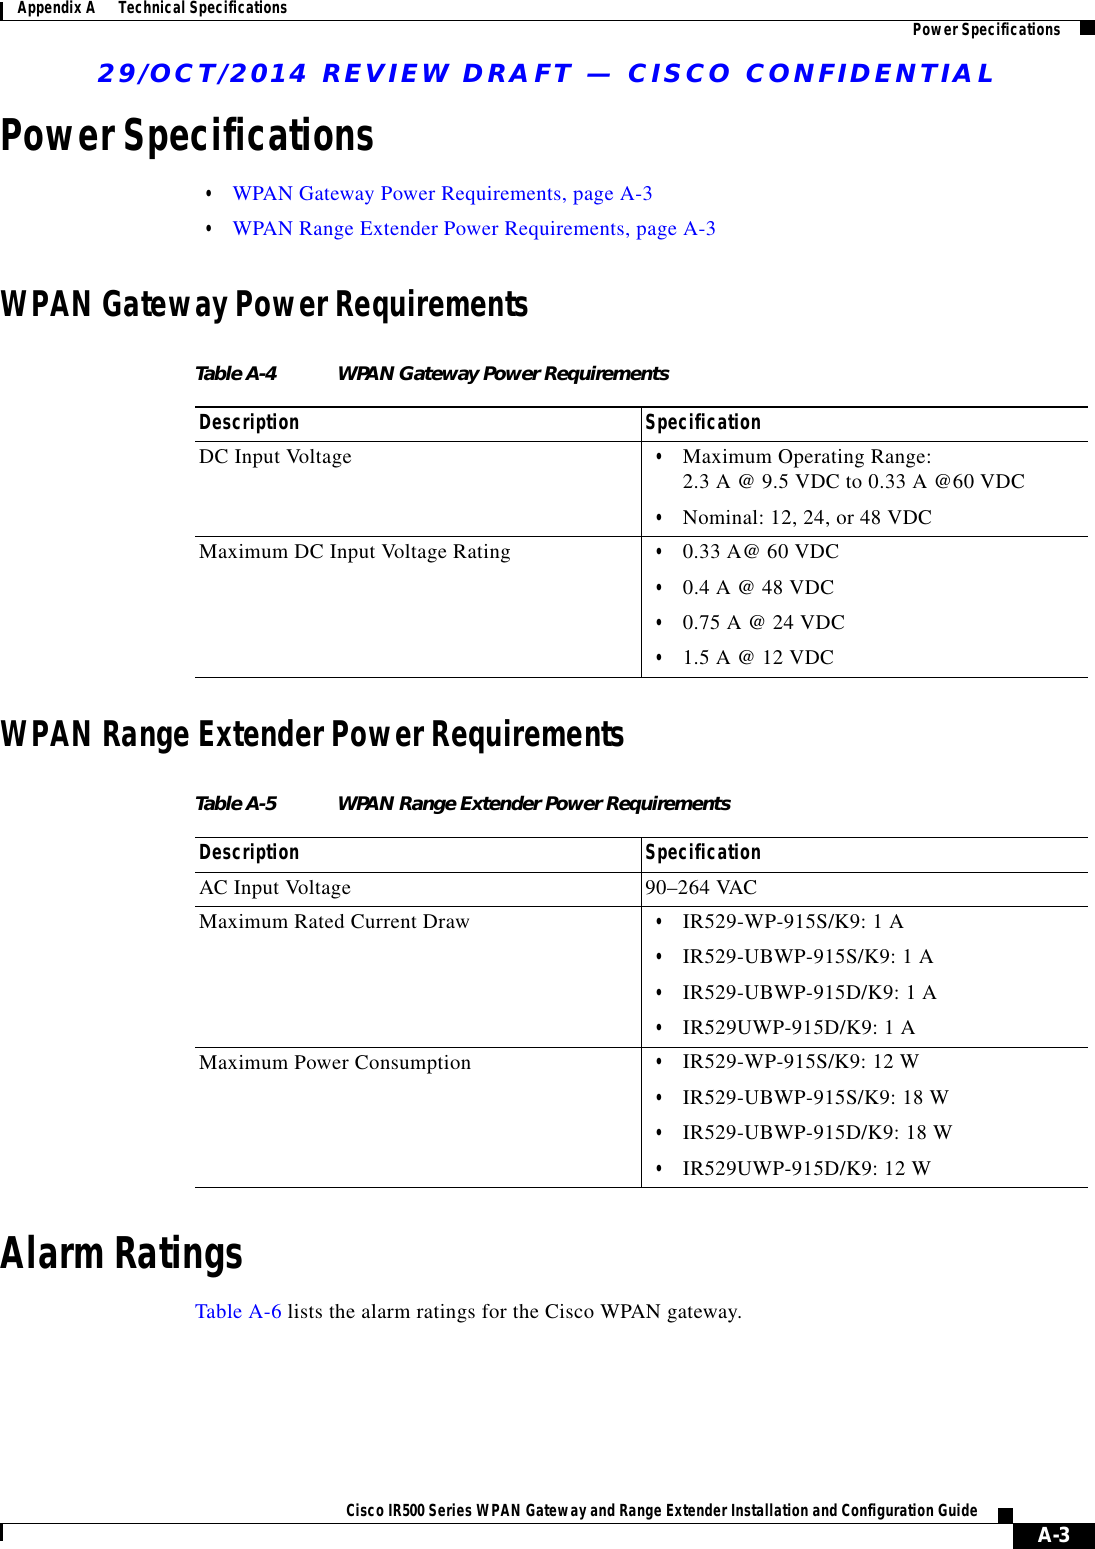 29/OCT/2014 REVIEW DRAFT — CISCO CONFIDENTIALA-3Cisco IR500 Series WPAN Gateway and Range Extender Installation and Configuration Guide Appendix A      Technical Specifications Power SpecificationsPower Specifications  • WPAN Gateway Power Requirements, page A-3  • WPAN Range Extender Power Requirements, page A-3WPAN Gateway Power RequirementsTable A-4 WPAN Gateway Power Requirements Description SpecificationDC Input Voltage   • Maximum Operating Range: 2.3 A @ 9.5 VDC to 0.33 A @60 VDC  • Nominal: 12, 24, or 48 VDCMaximum DC Input Voltage Rating   • 0.33 A@ 60 VDC  • 0.4 A @ 48 VDC   • 0.75 A @ 24 VDC   • 1.5 A @ 12 VDCWPAN Range Extender Power RequirementsTable A-5 WPAN Range Extender Power Requirements Description SpecificationAC Input Voltage 90–264 VACMaximum Rated Current Draw   • IR529-WP-915S/K9: 1 A  • IR529-UBWP-915S/K9: 1 A  • IR529-UBWP-915D/K9: 1 A  • IR529UWP-915D/K9: 1 AMaximum Power Consumption   • IR529-WP-915S/K9: 12 W  • IR529-UBWP-915S/K9: 18 W  • IR529-UBWP-915D/K9: 18 W  • IR529UWP-915D/K9: 12 WAlarm RatingsTable A-6 lists the alarm ratings for the Cisco WPAN gateway.